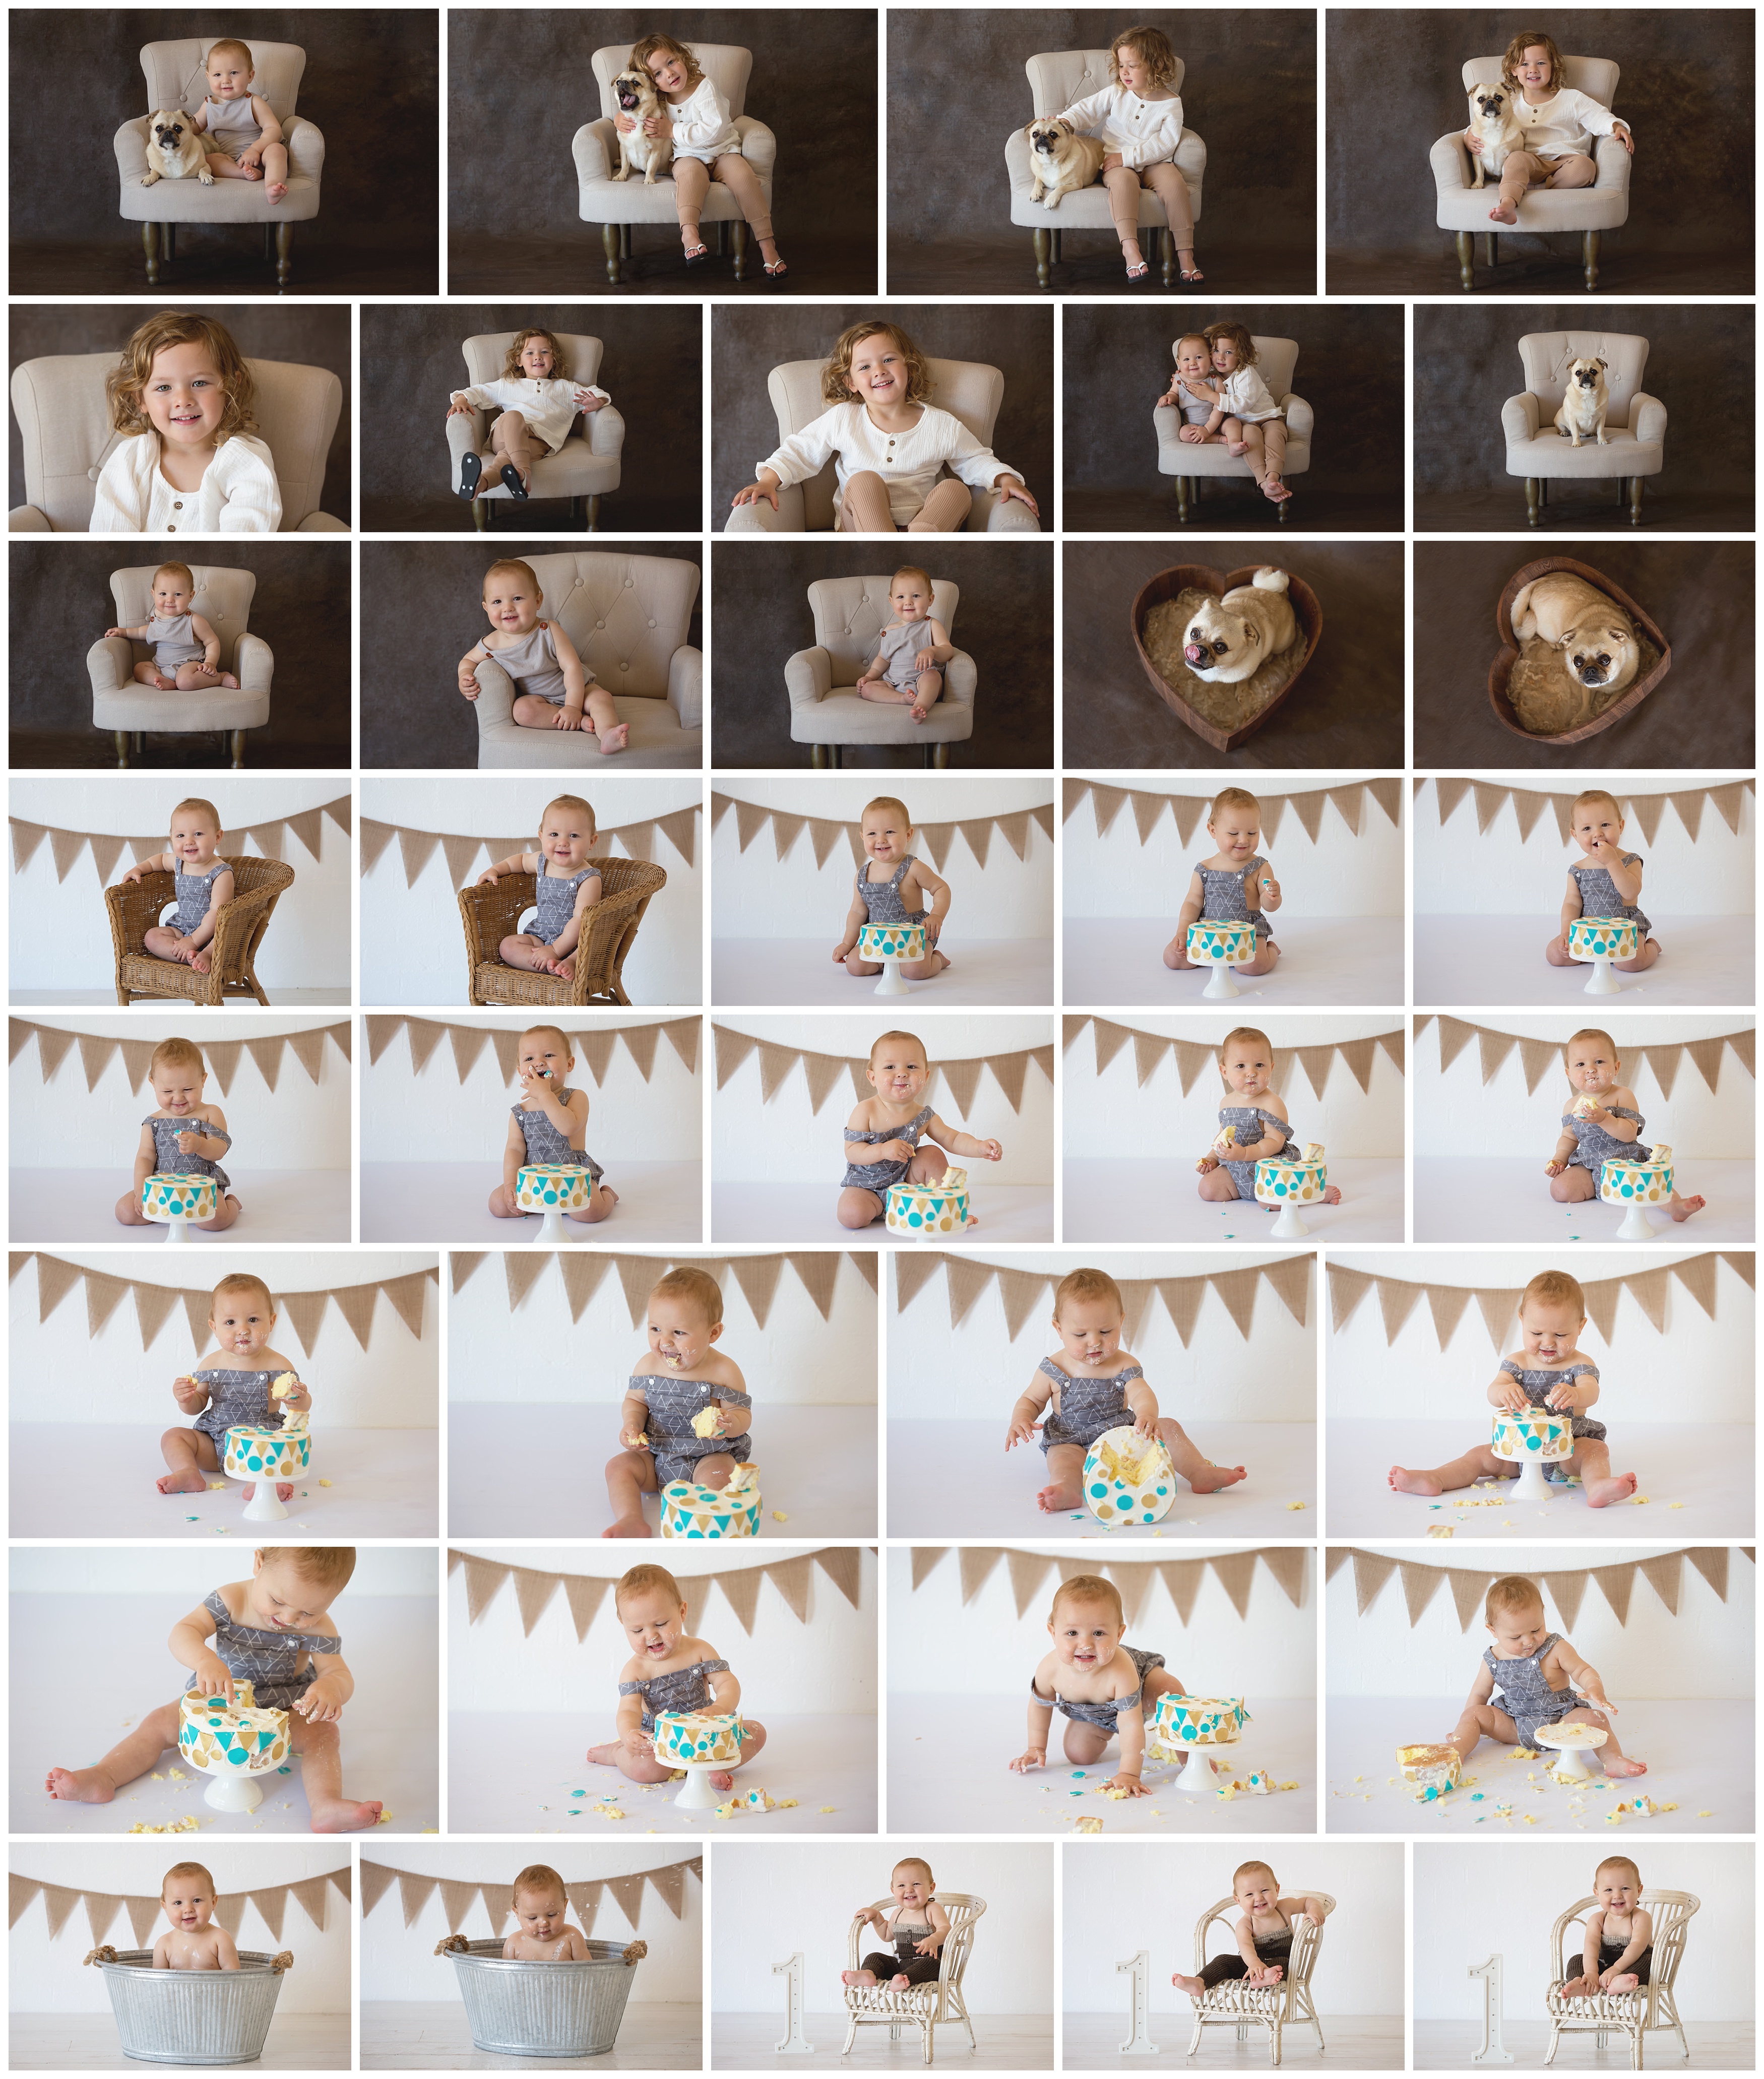 One year old boy with a cake and eating eat with his hands. ALso includes images on a chair with his big brother and with his pet dog a pug. 